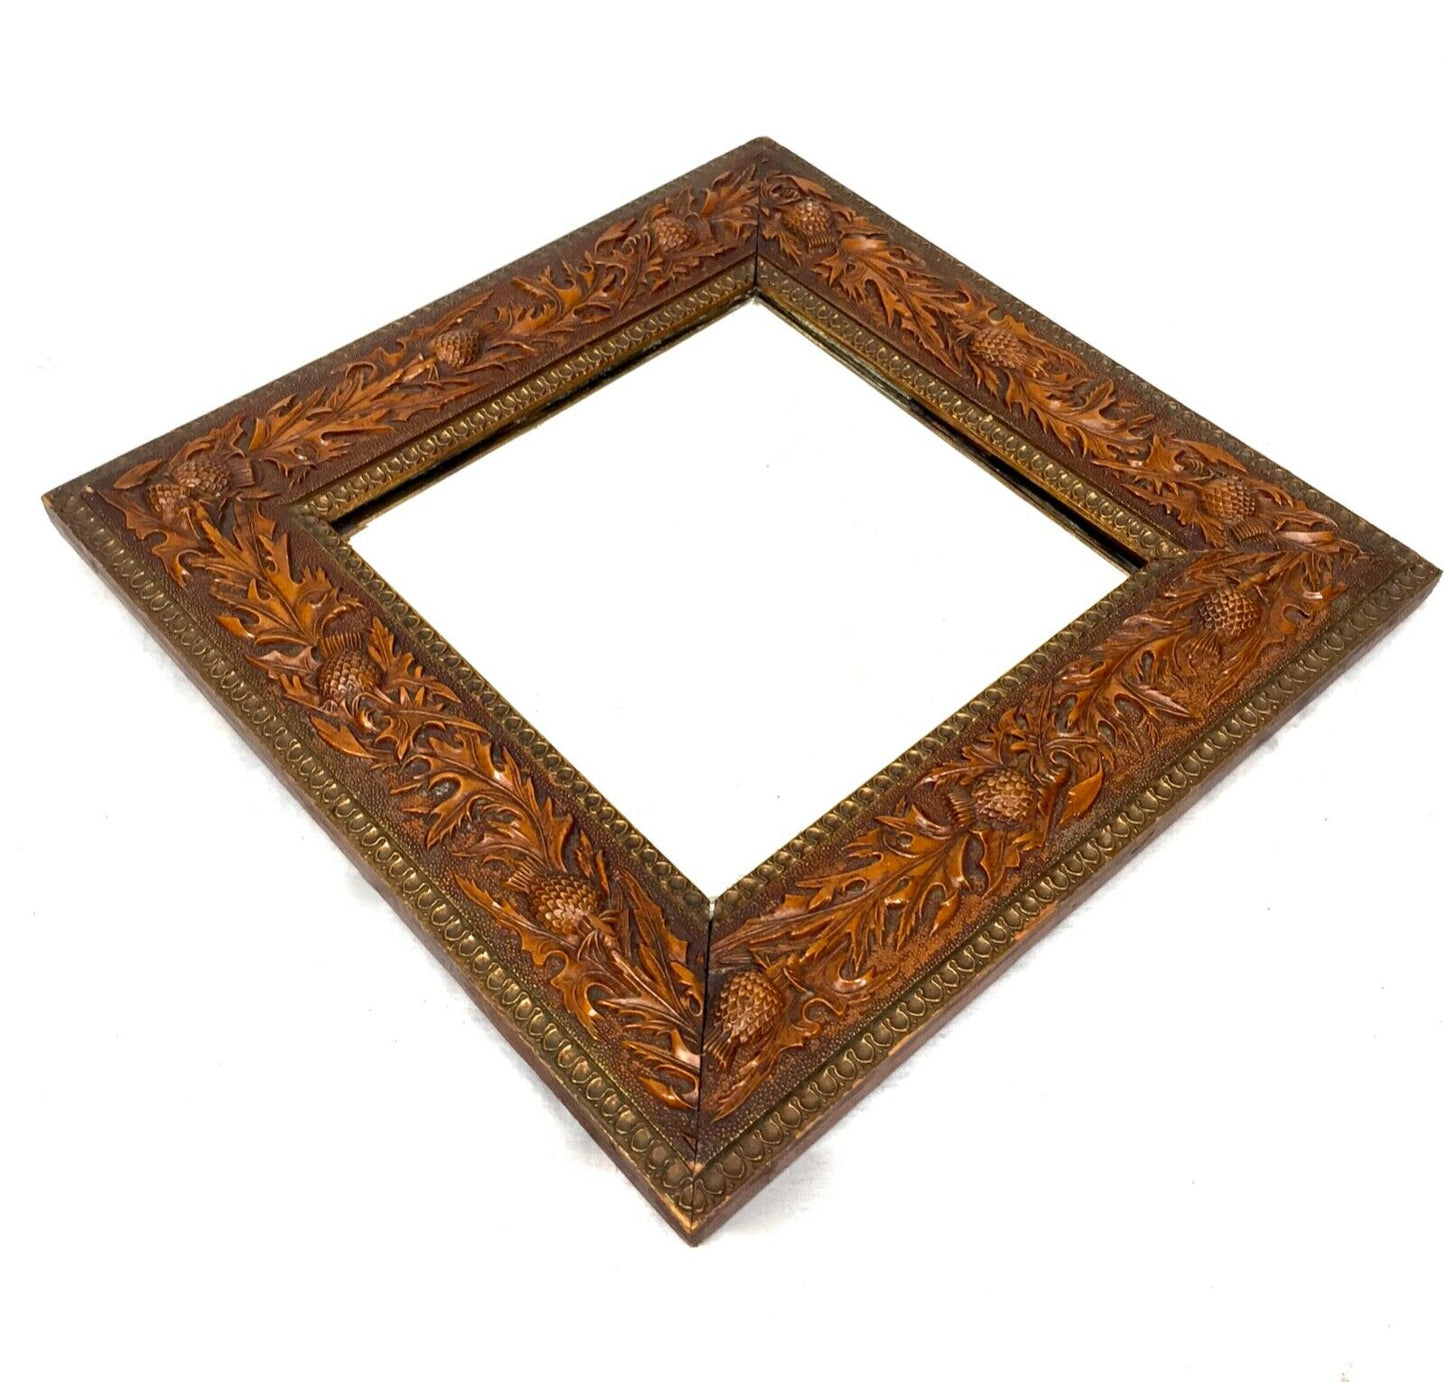 Antique Carved Wall Mirror / Wall Hanging / Left Foliage / c.1920